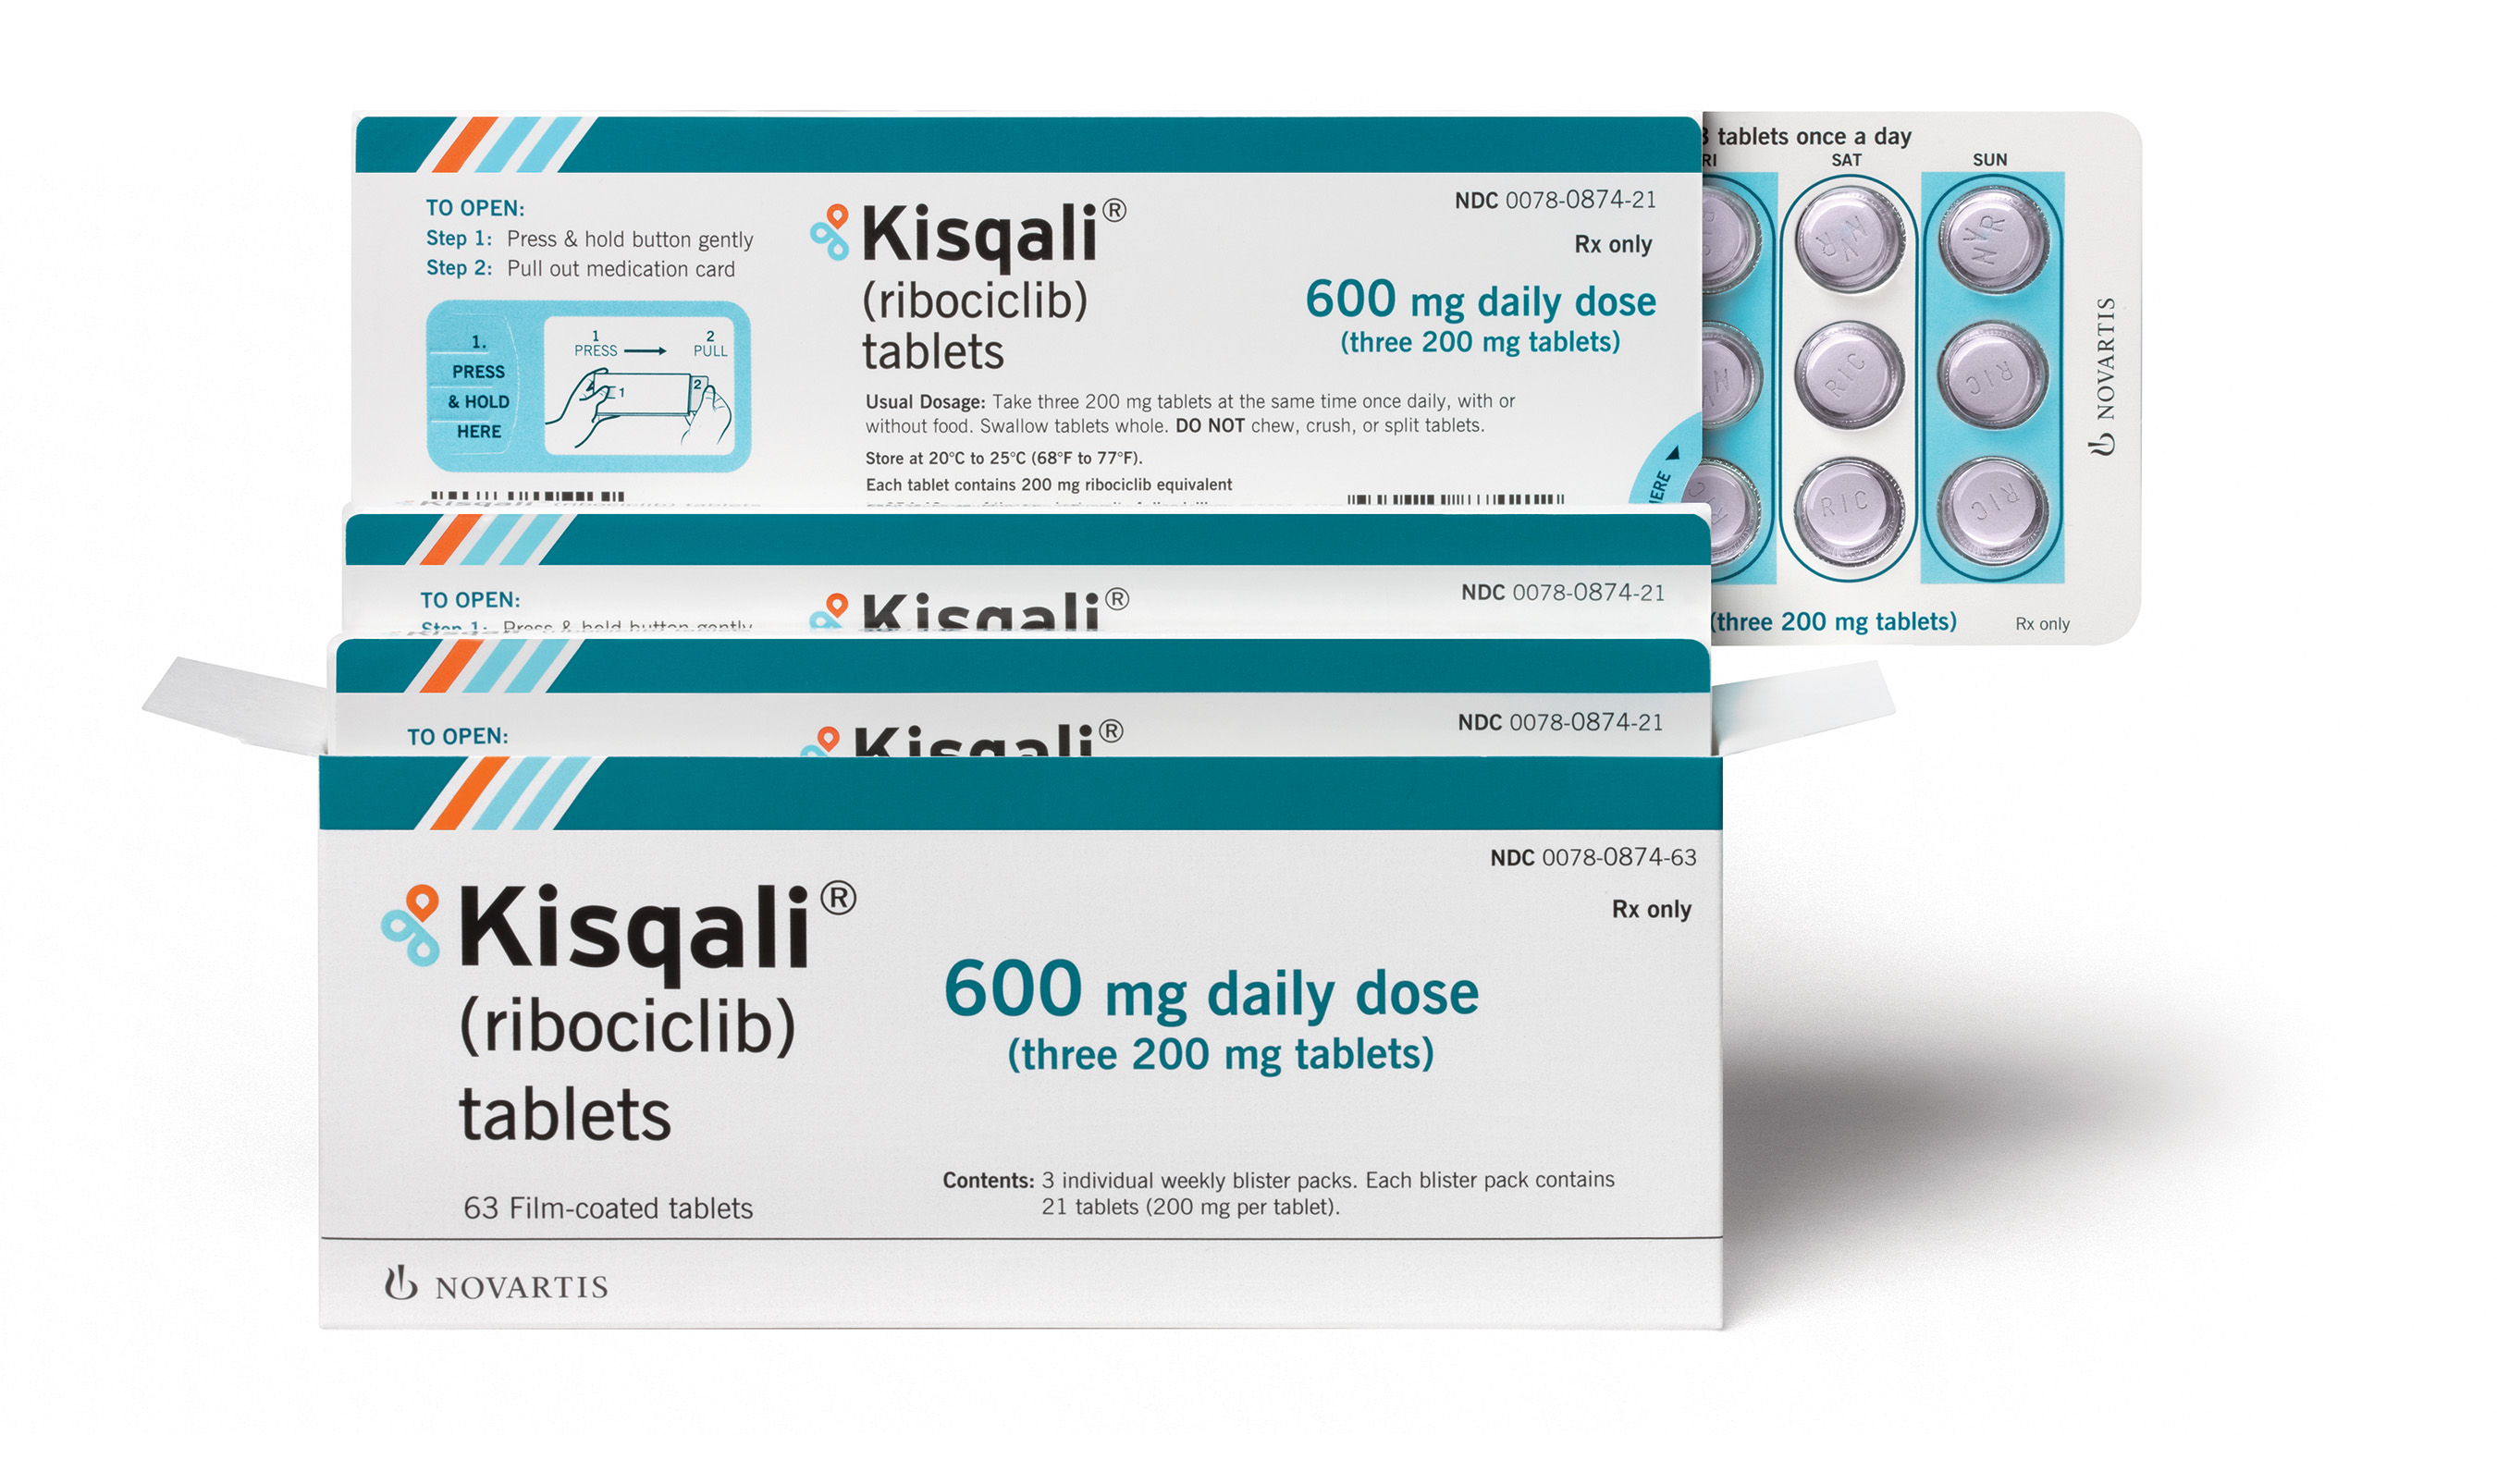 novartis-kisqali-now-first-and-only-cdk4-6-inhibitor-indicated-in-us